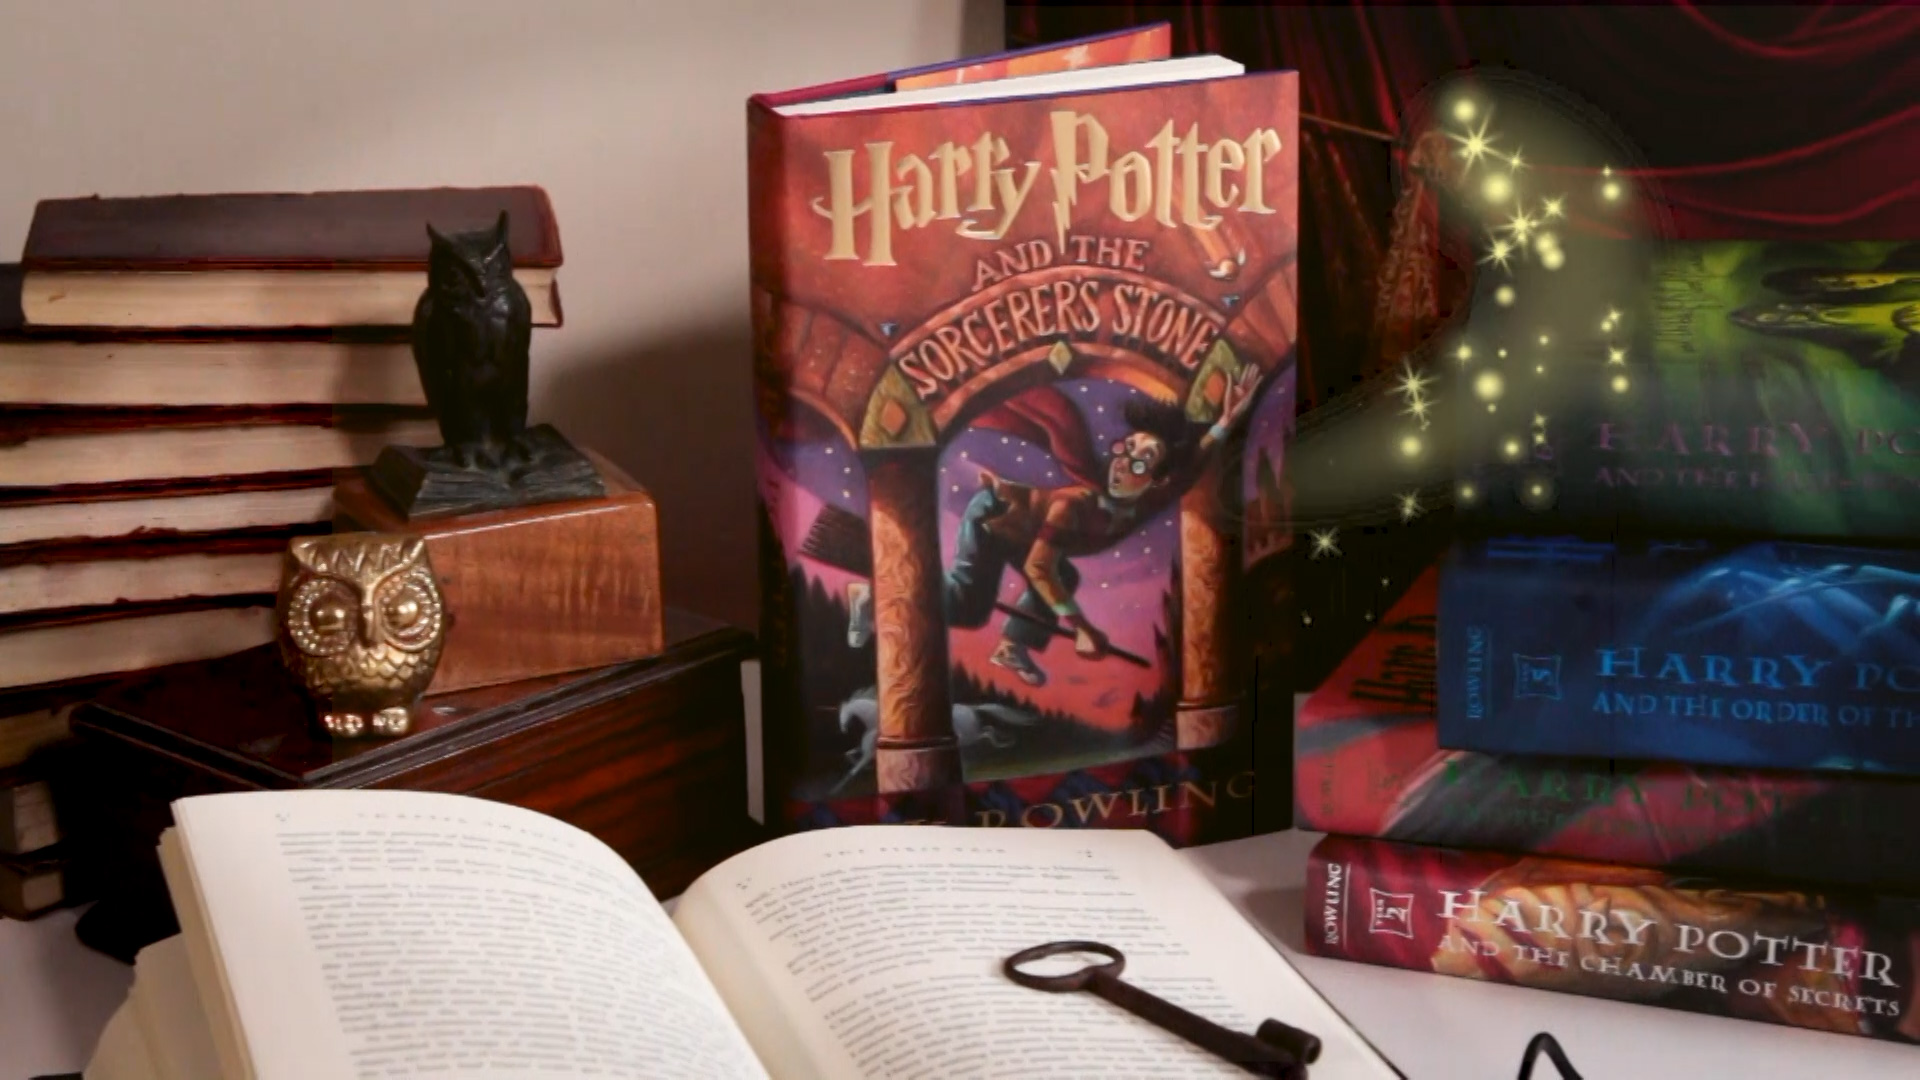 Harry Potter and the Sorcerer's Stone: book by Scholastic Inc.